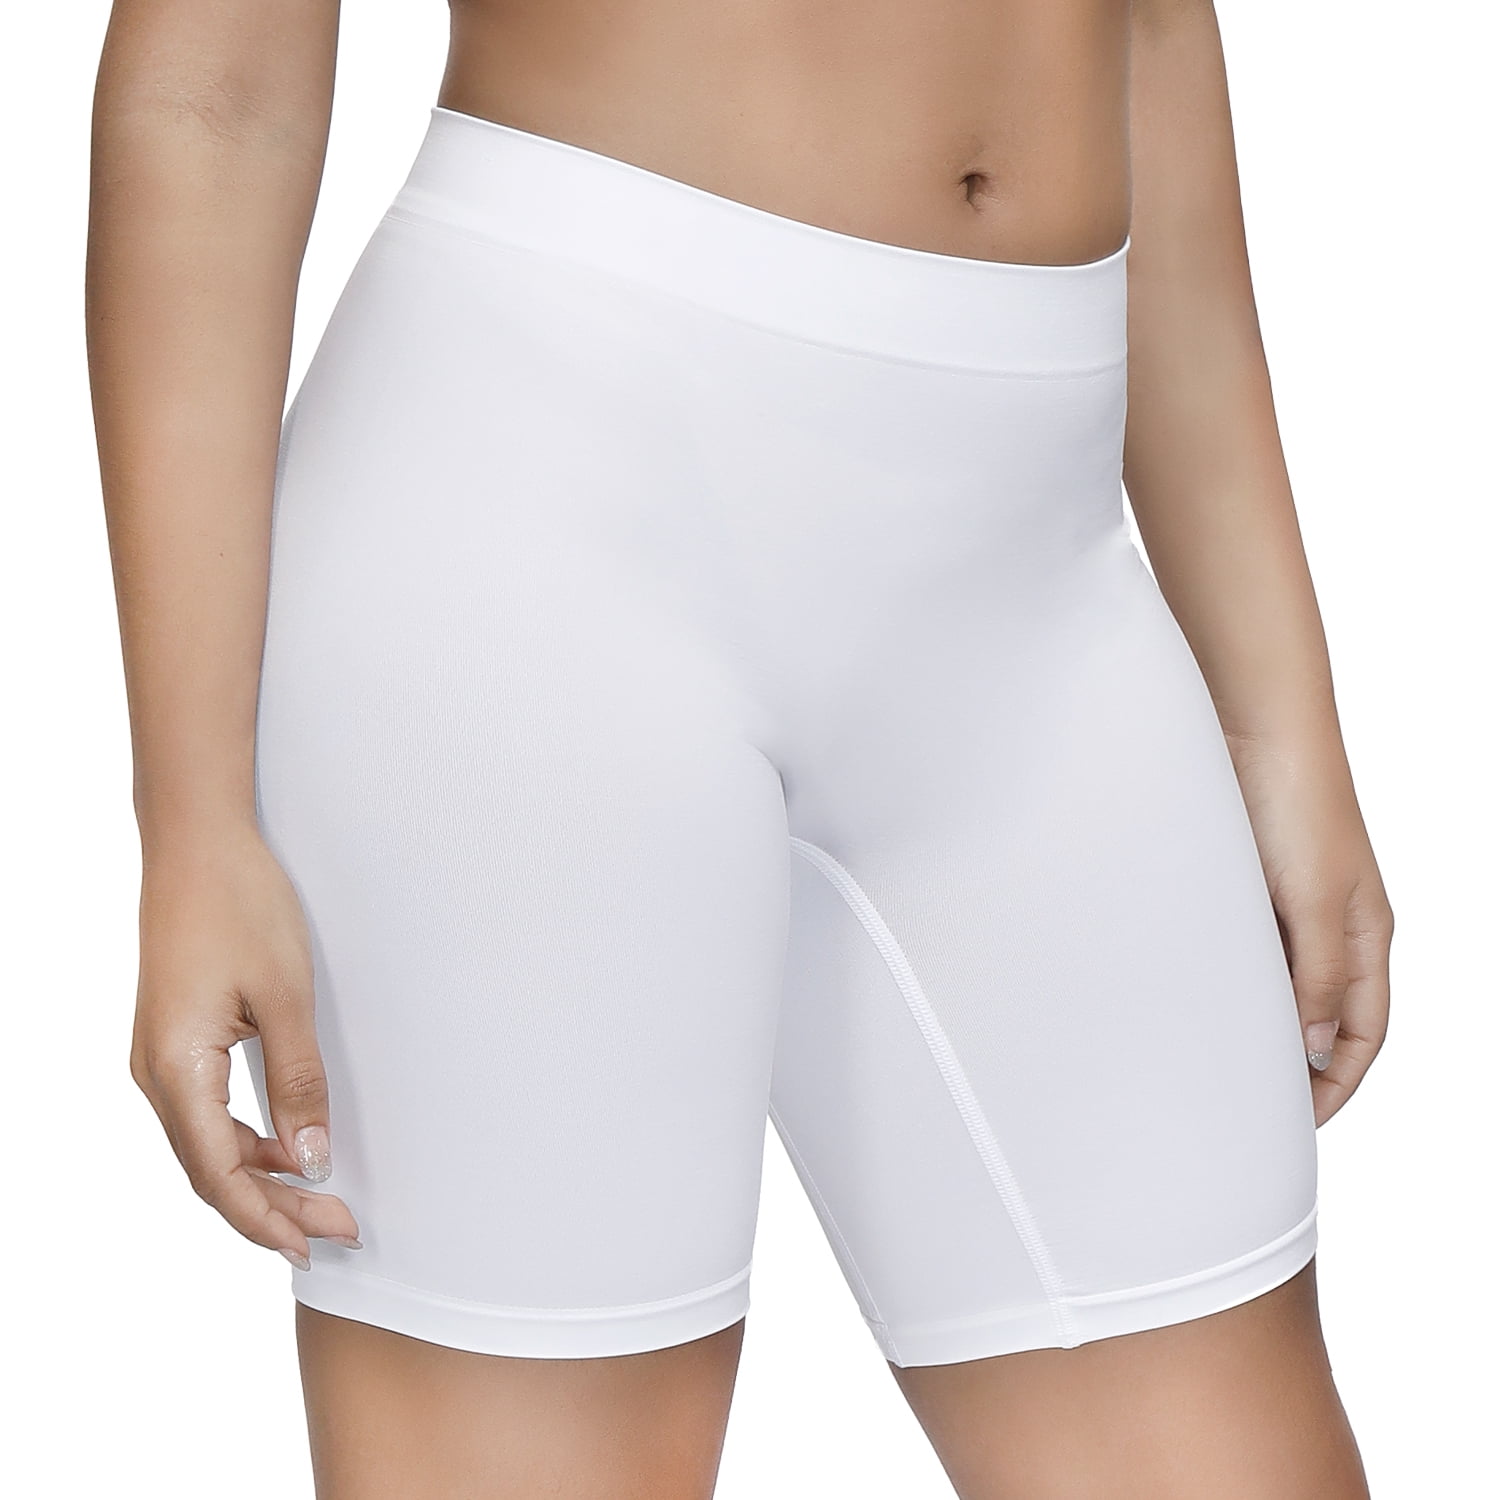 Molasus Women's Cotton Underwear High Waisted Full Coverage